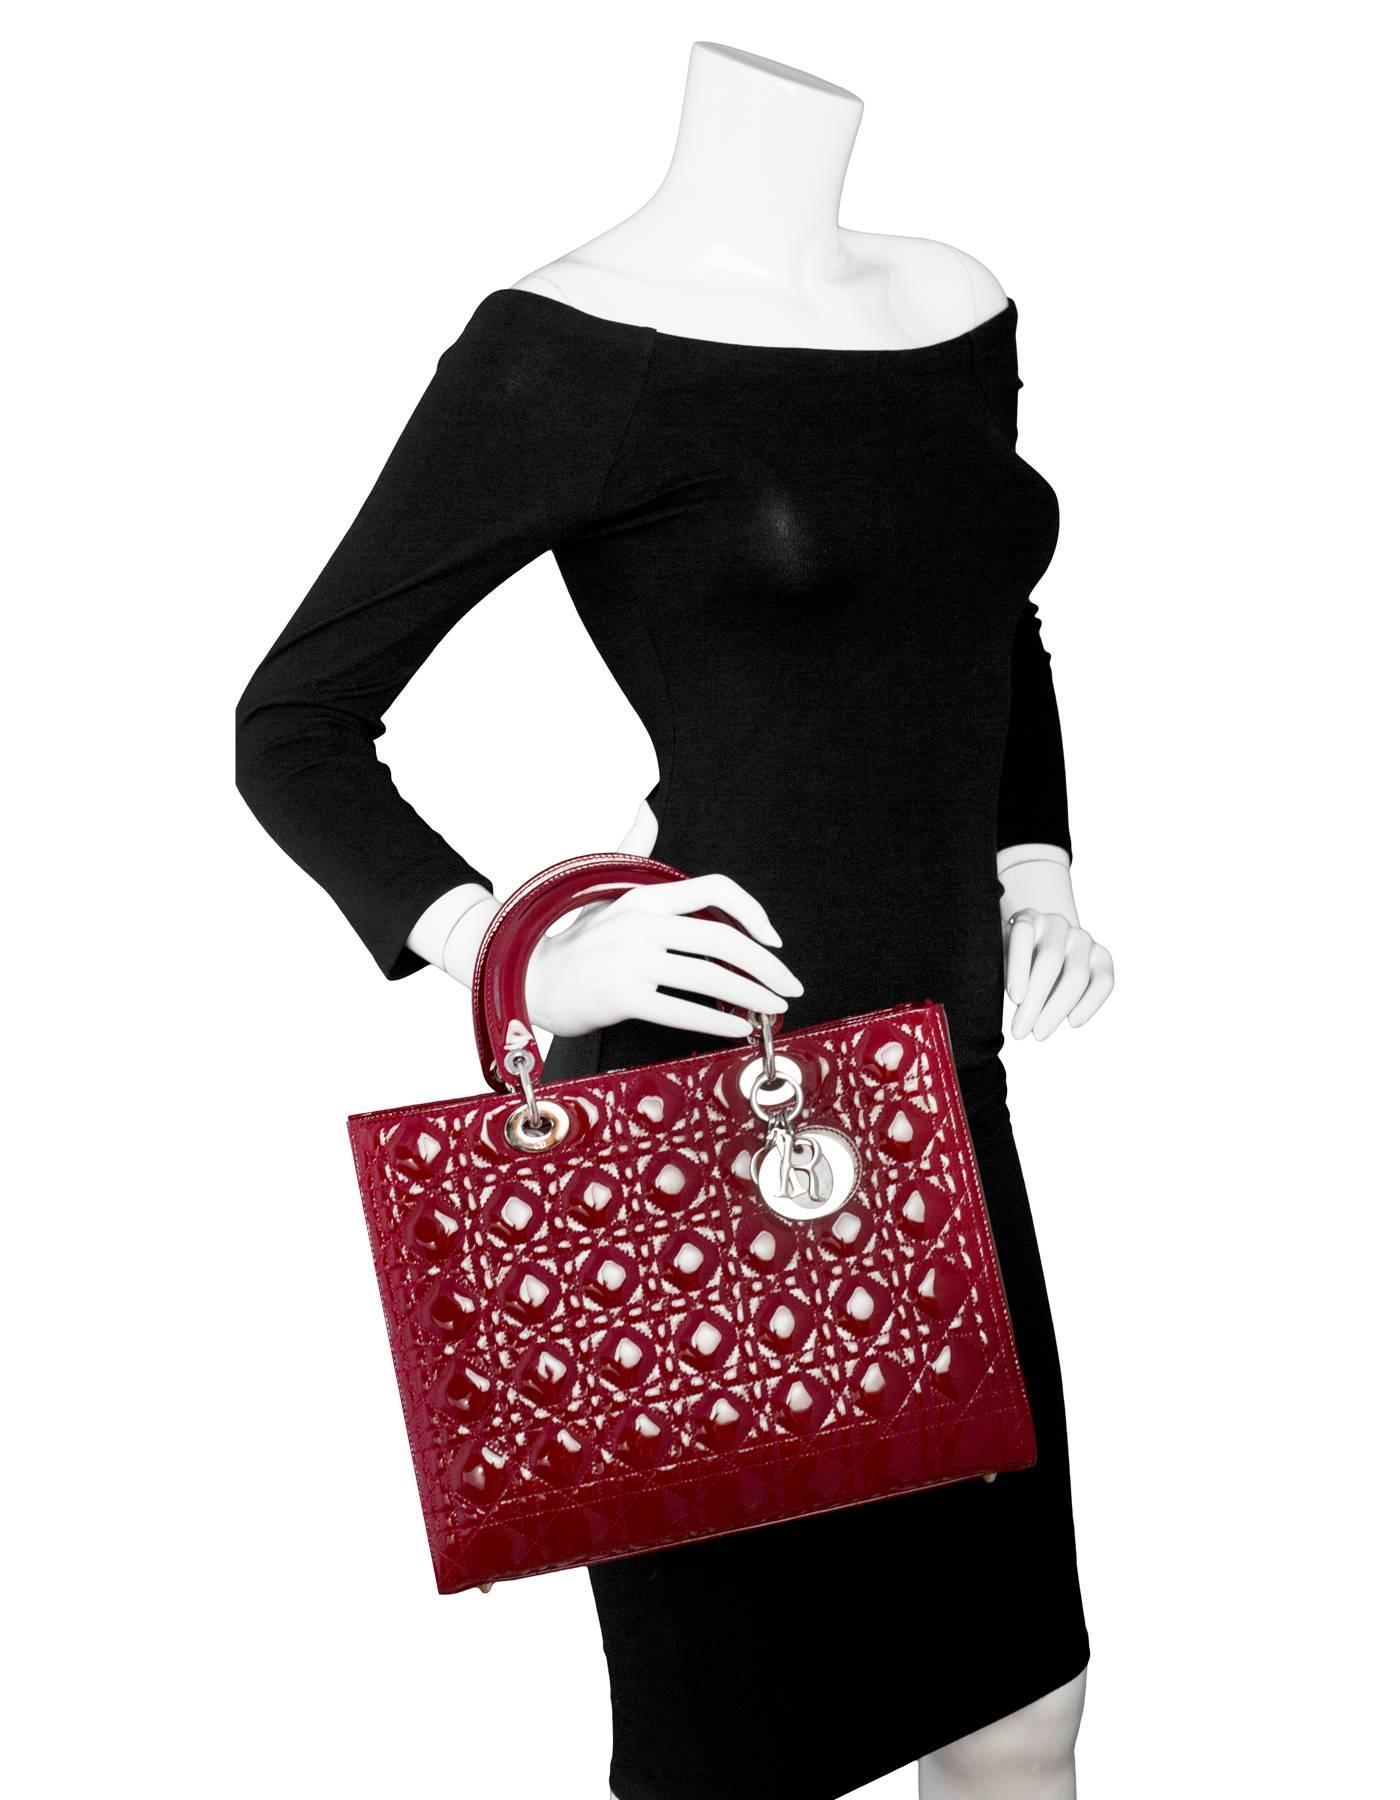 Christian Dior Red Patent Large Lady Dior Bag
Includes optional shoulder strap

Made In: Italy
Color: Red
Hardware: Silvertone
Materials: Patent leather, metal
Lining: Red textile
Closure/Opening: Zip top
Exterior Pockets: None
Interior Pockets: One